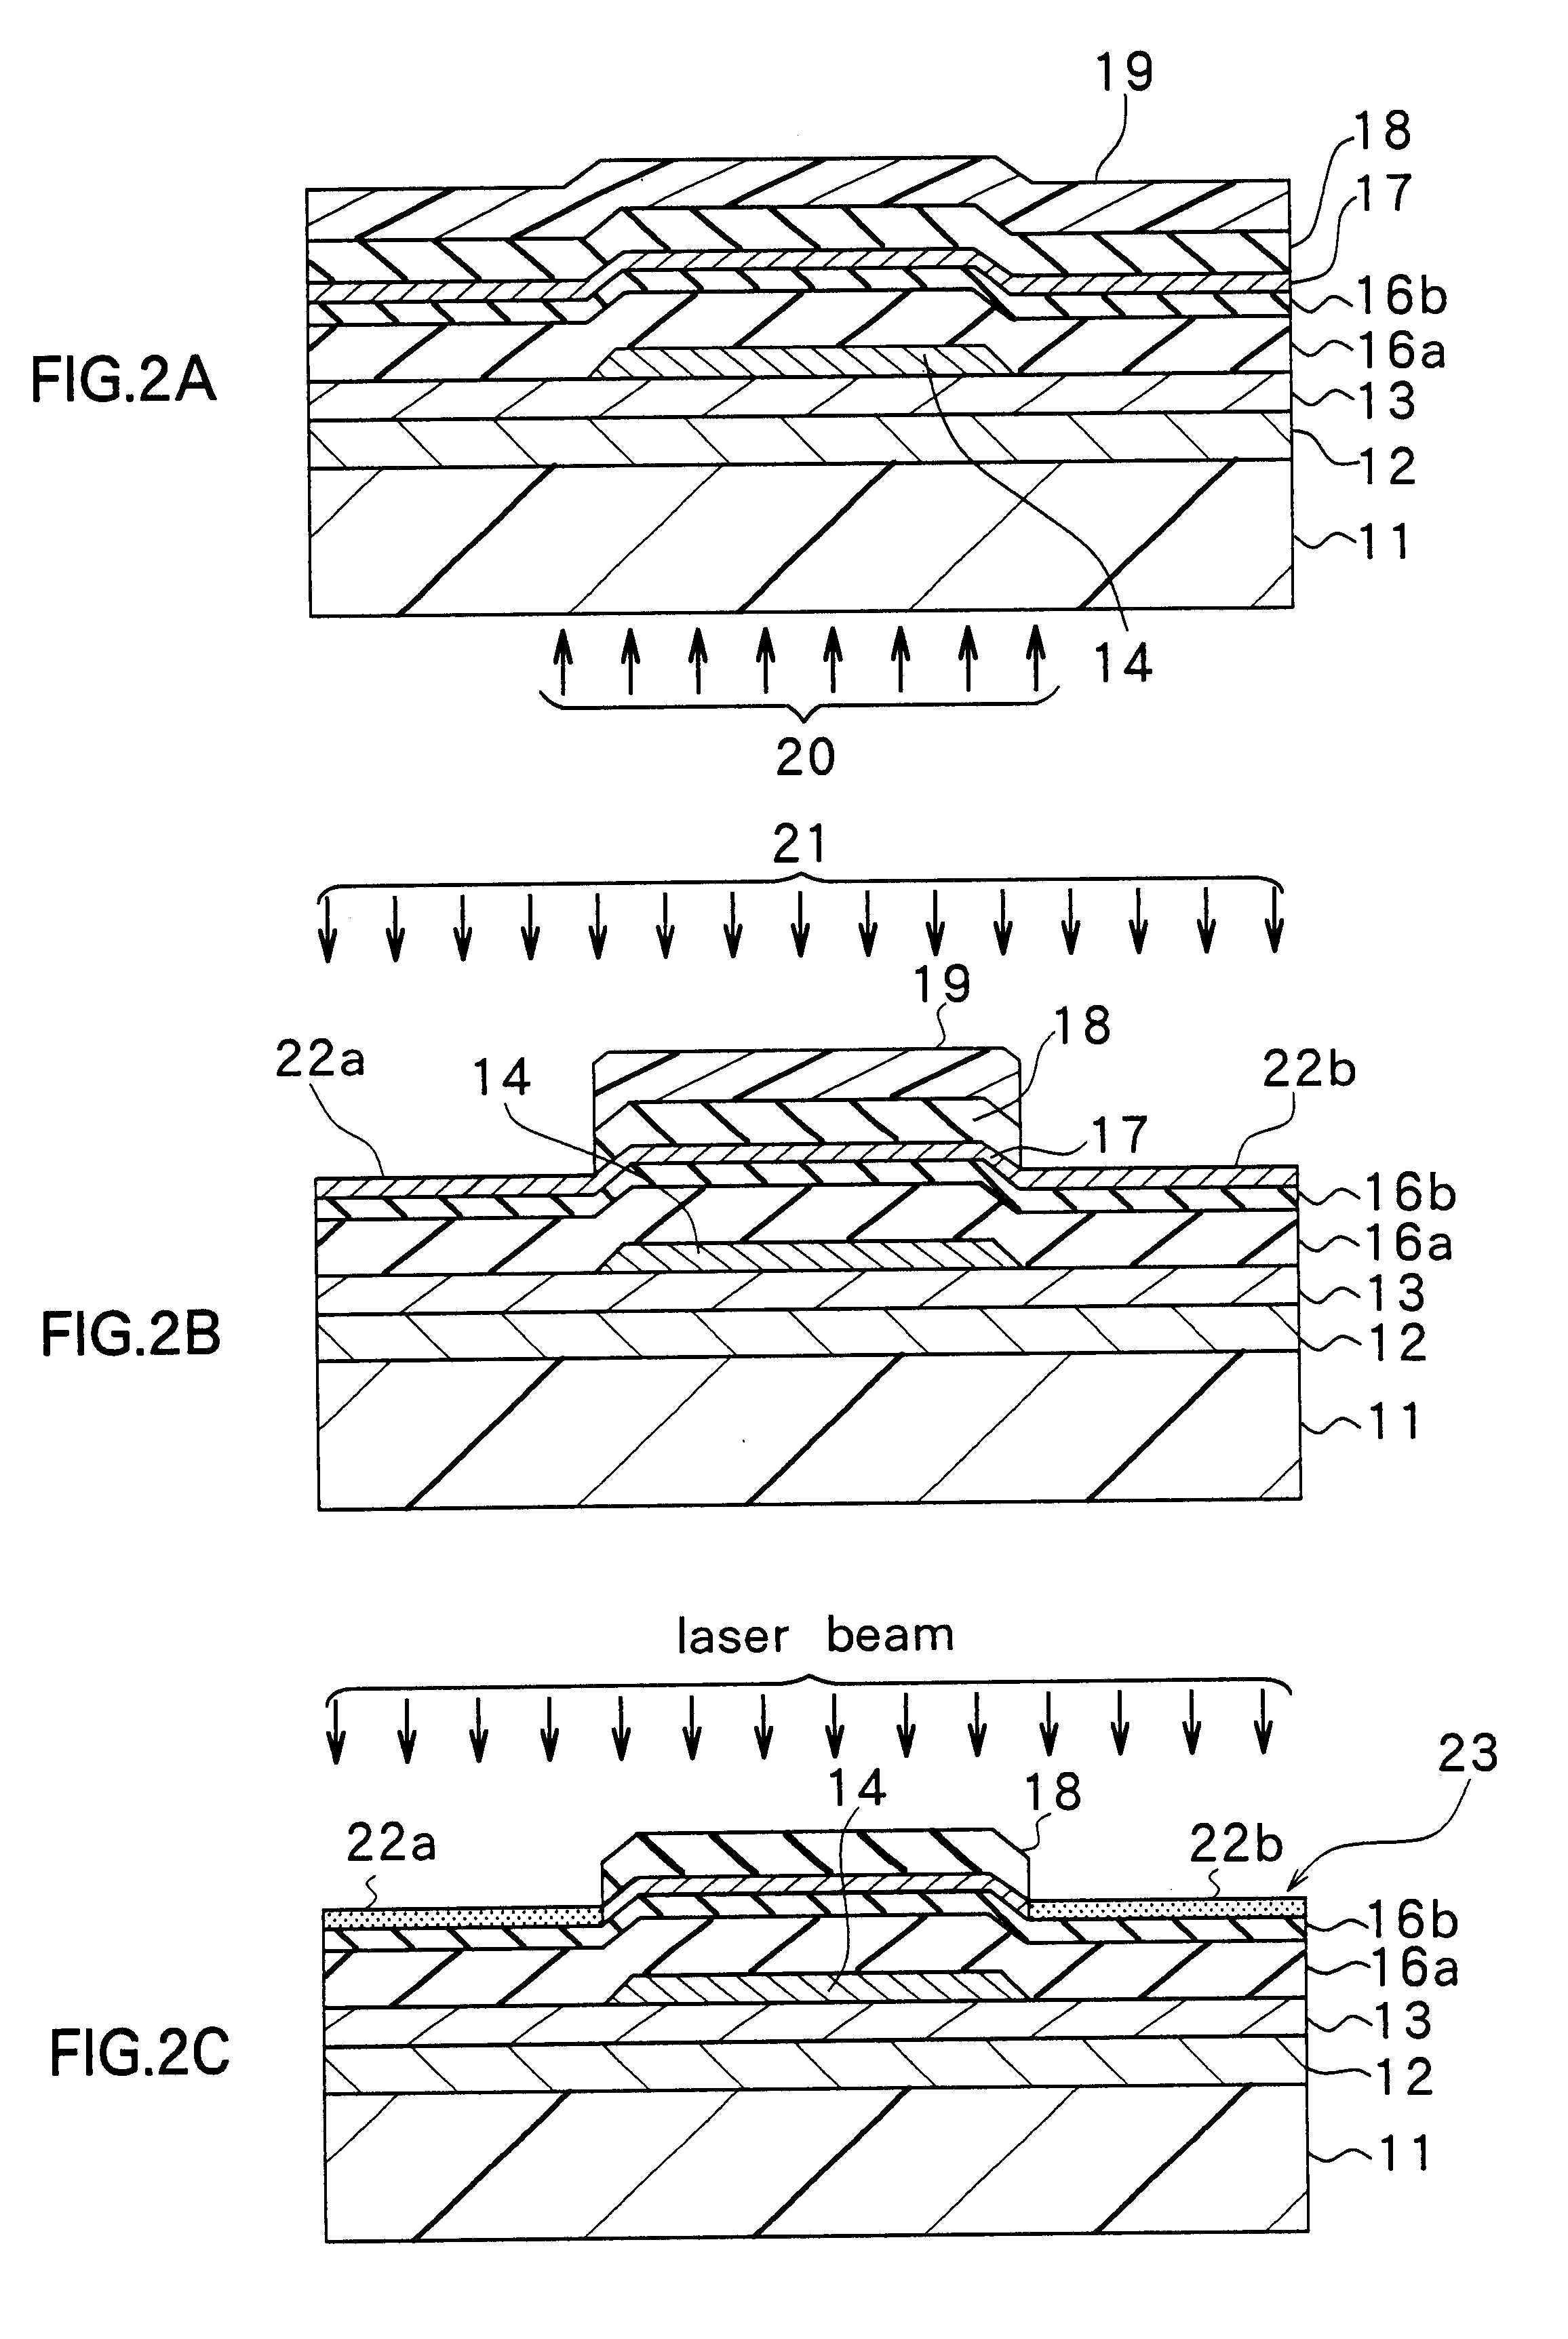 Method of forming a semiconductor thin film on a plastic substrate